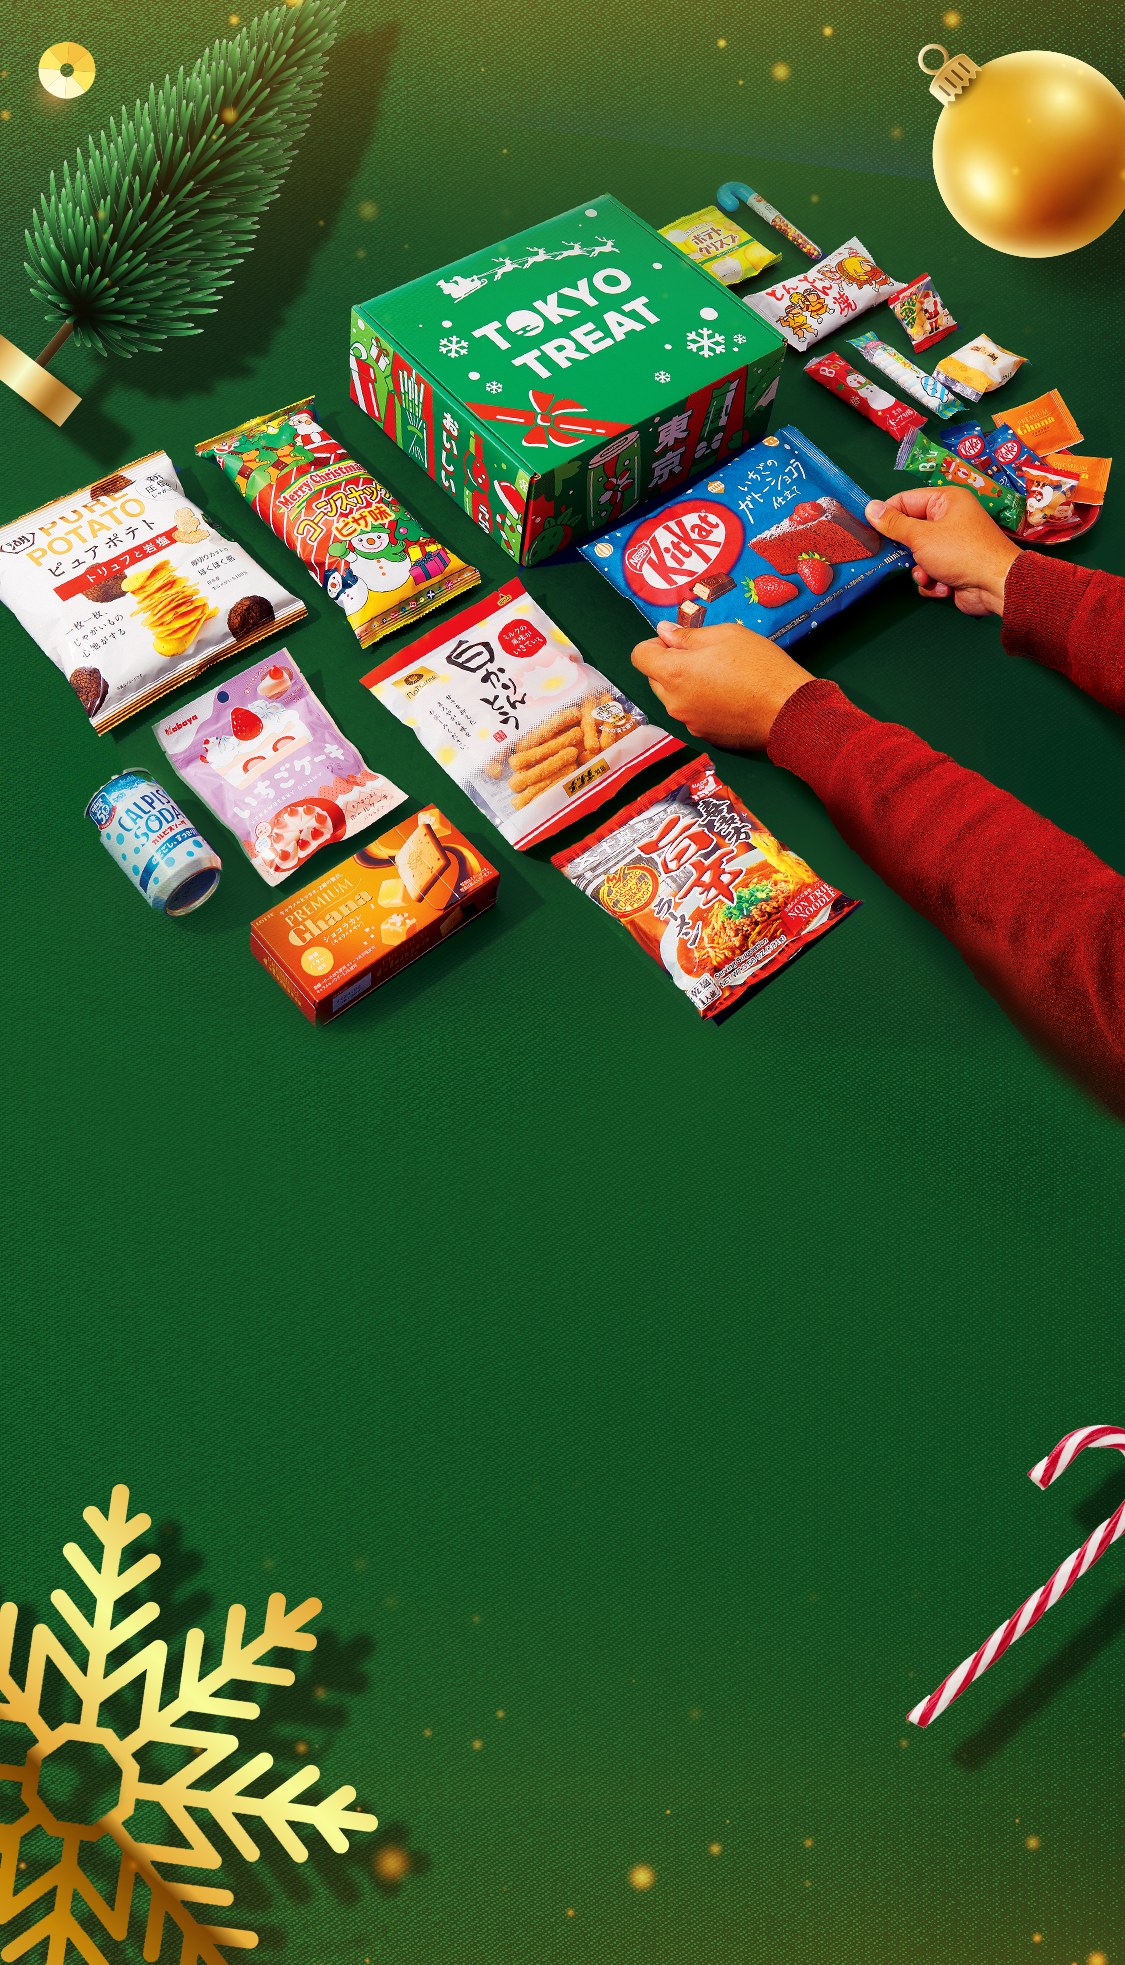 TokyoTreat box sits against a dark green background surrounded by Christmas motifs.